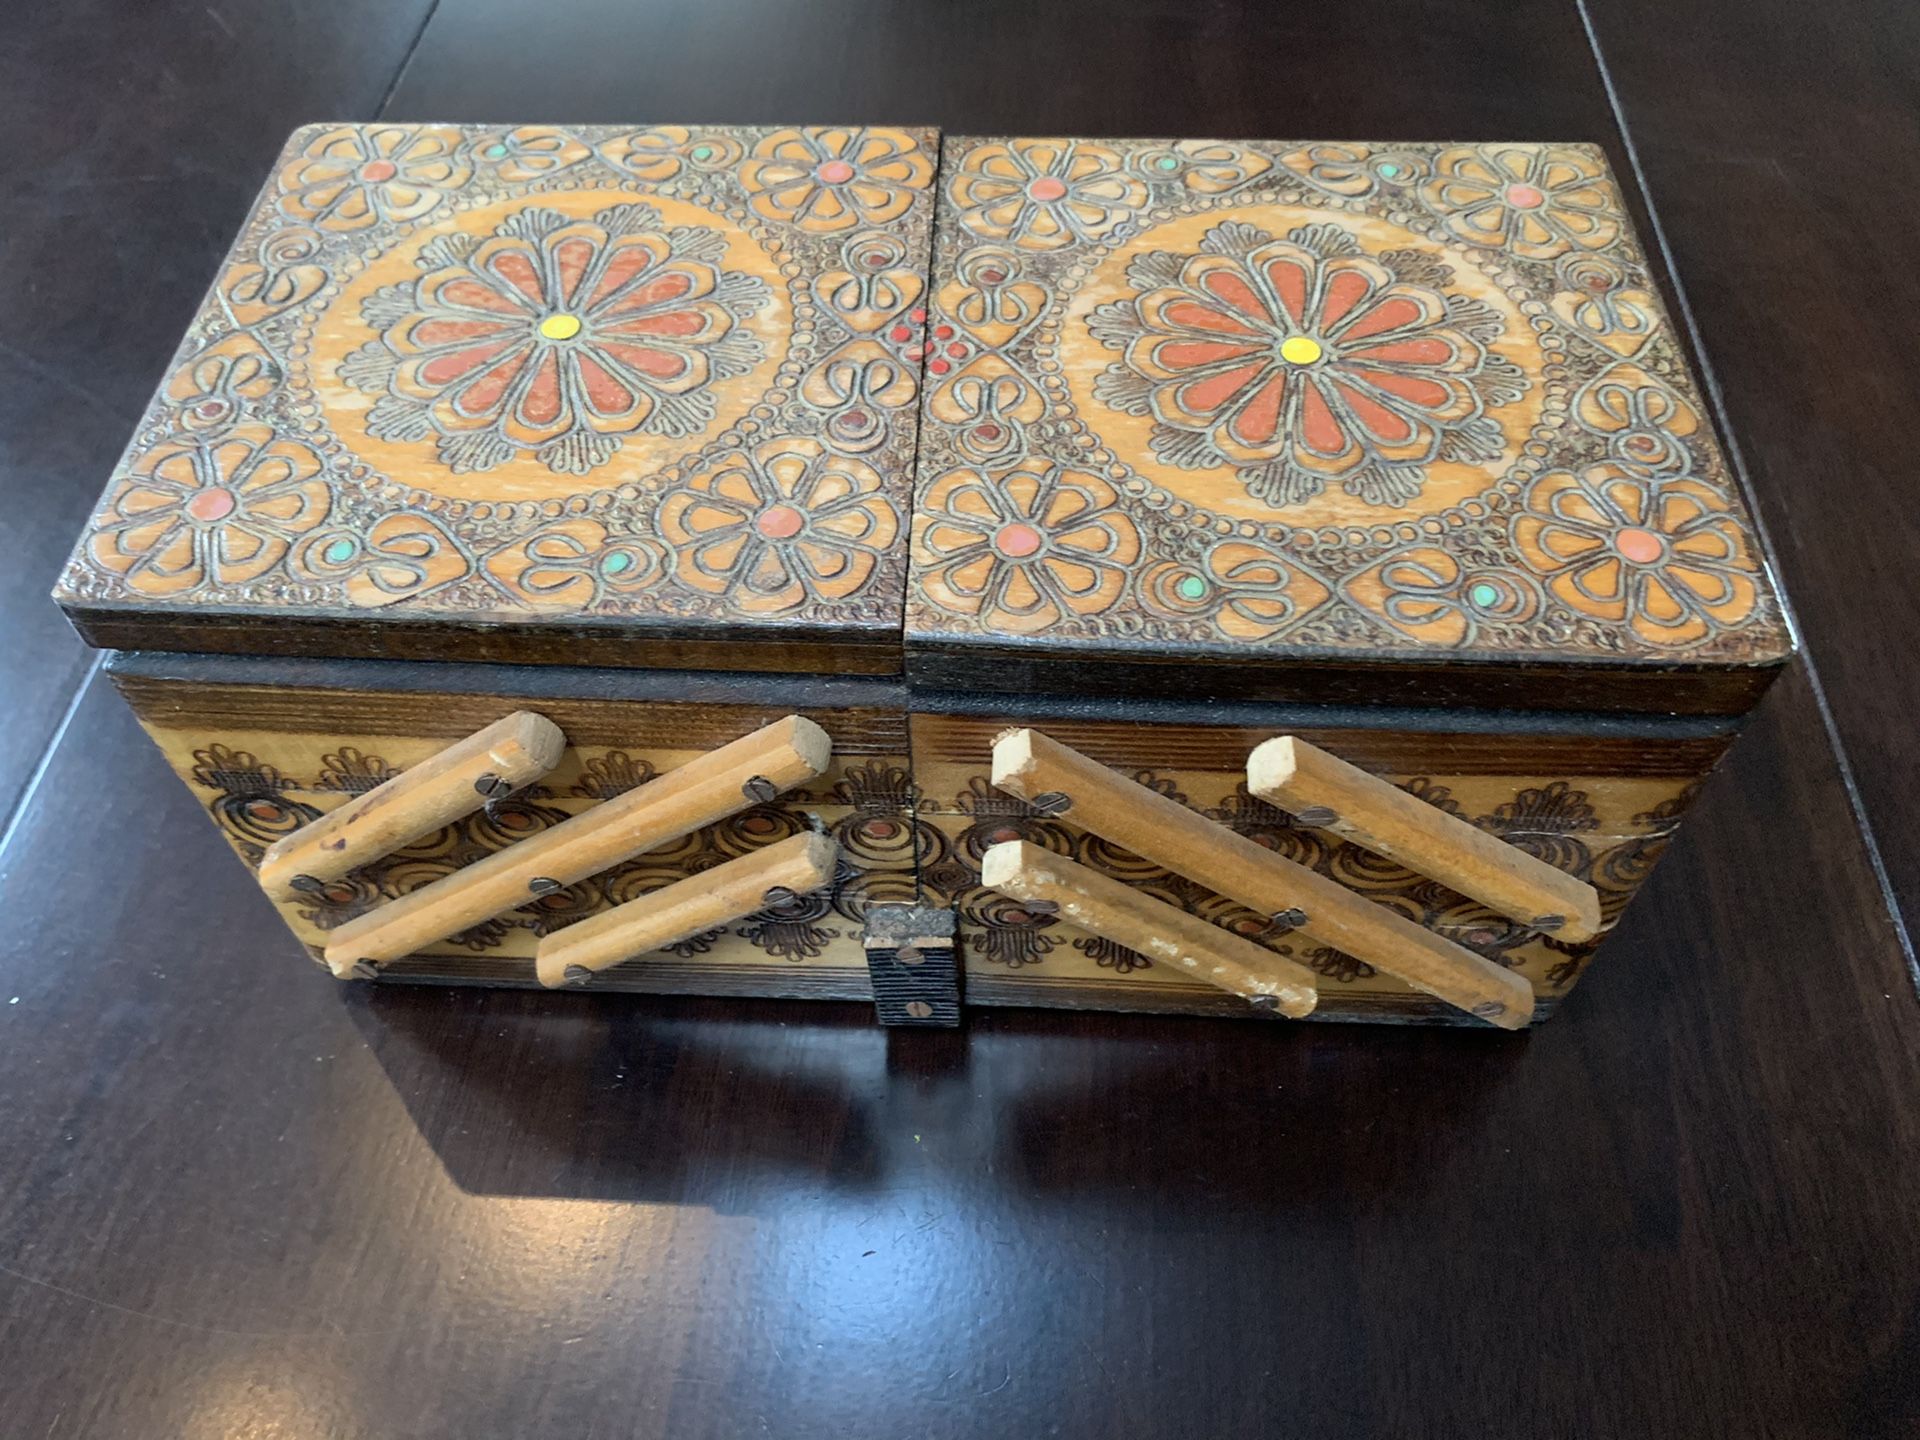 2 Hand Made and Painted wooden boxes made in Poland